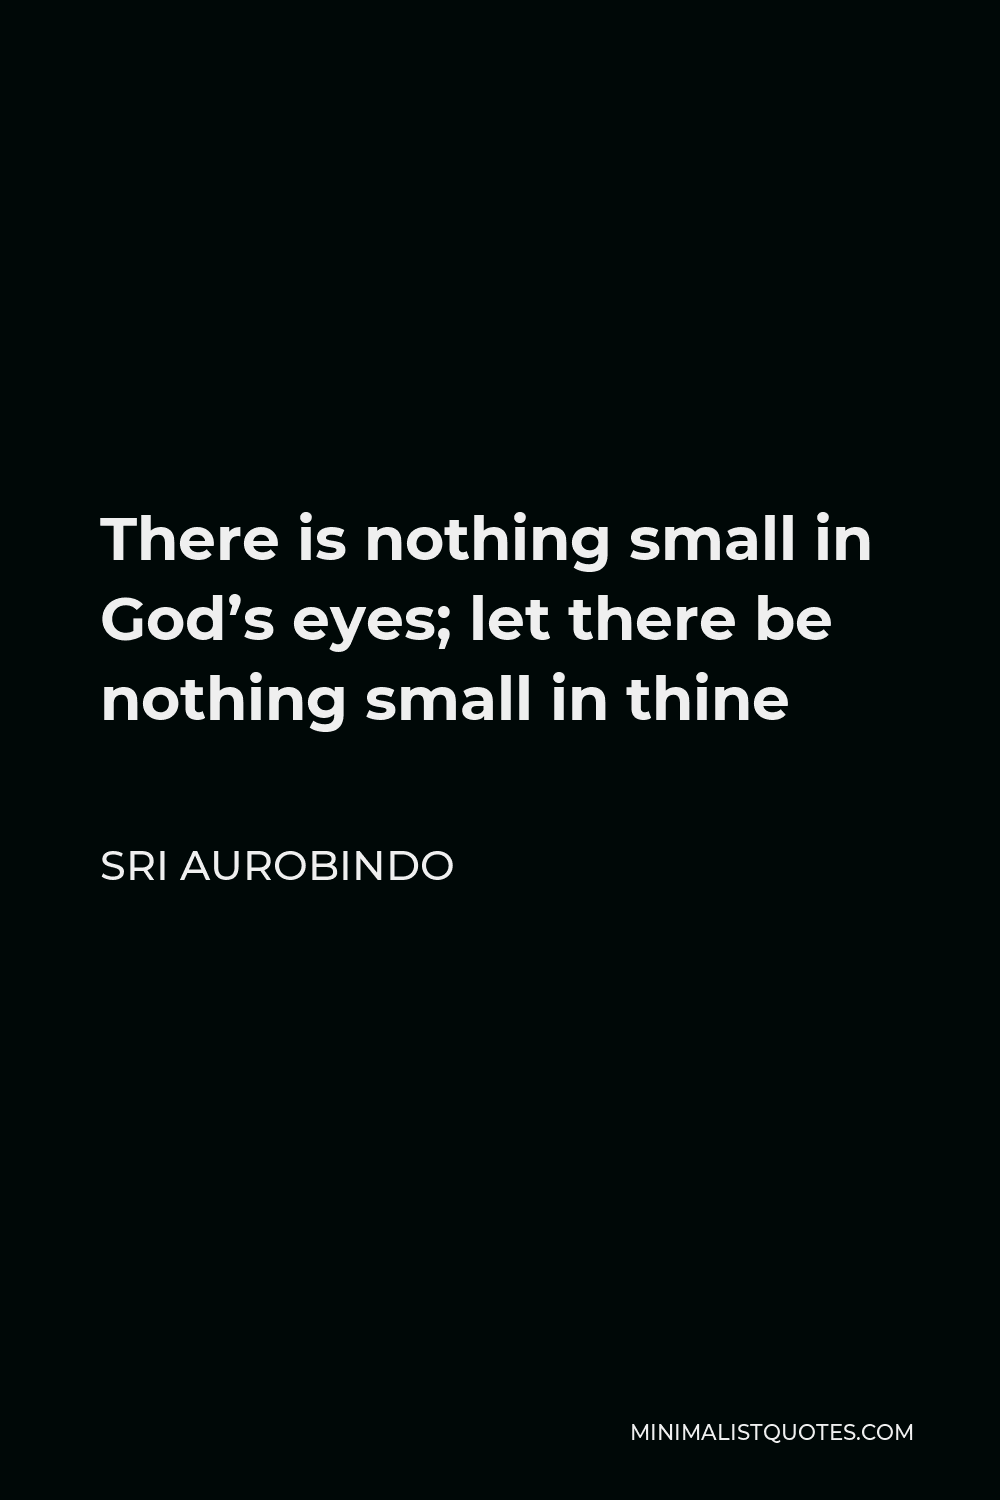 Sri Aurobindo Quote - There is nothing small in God’s eyes; let there be nothing small in thine